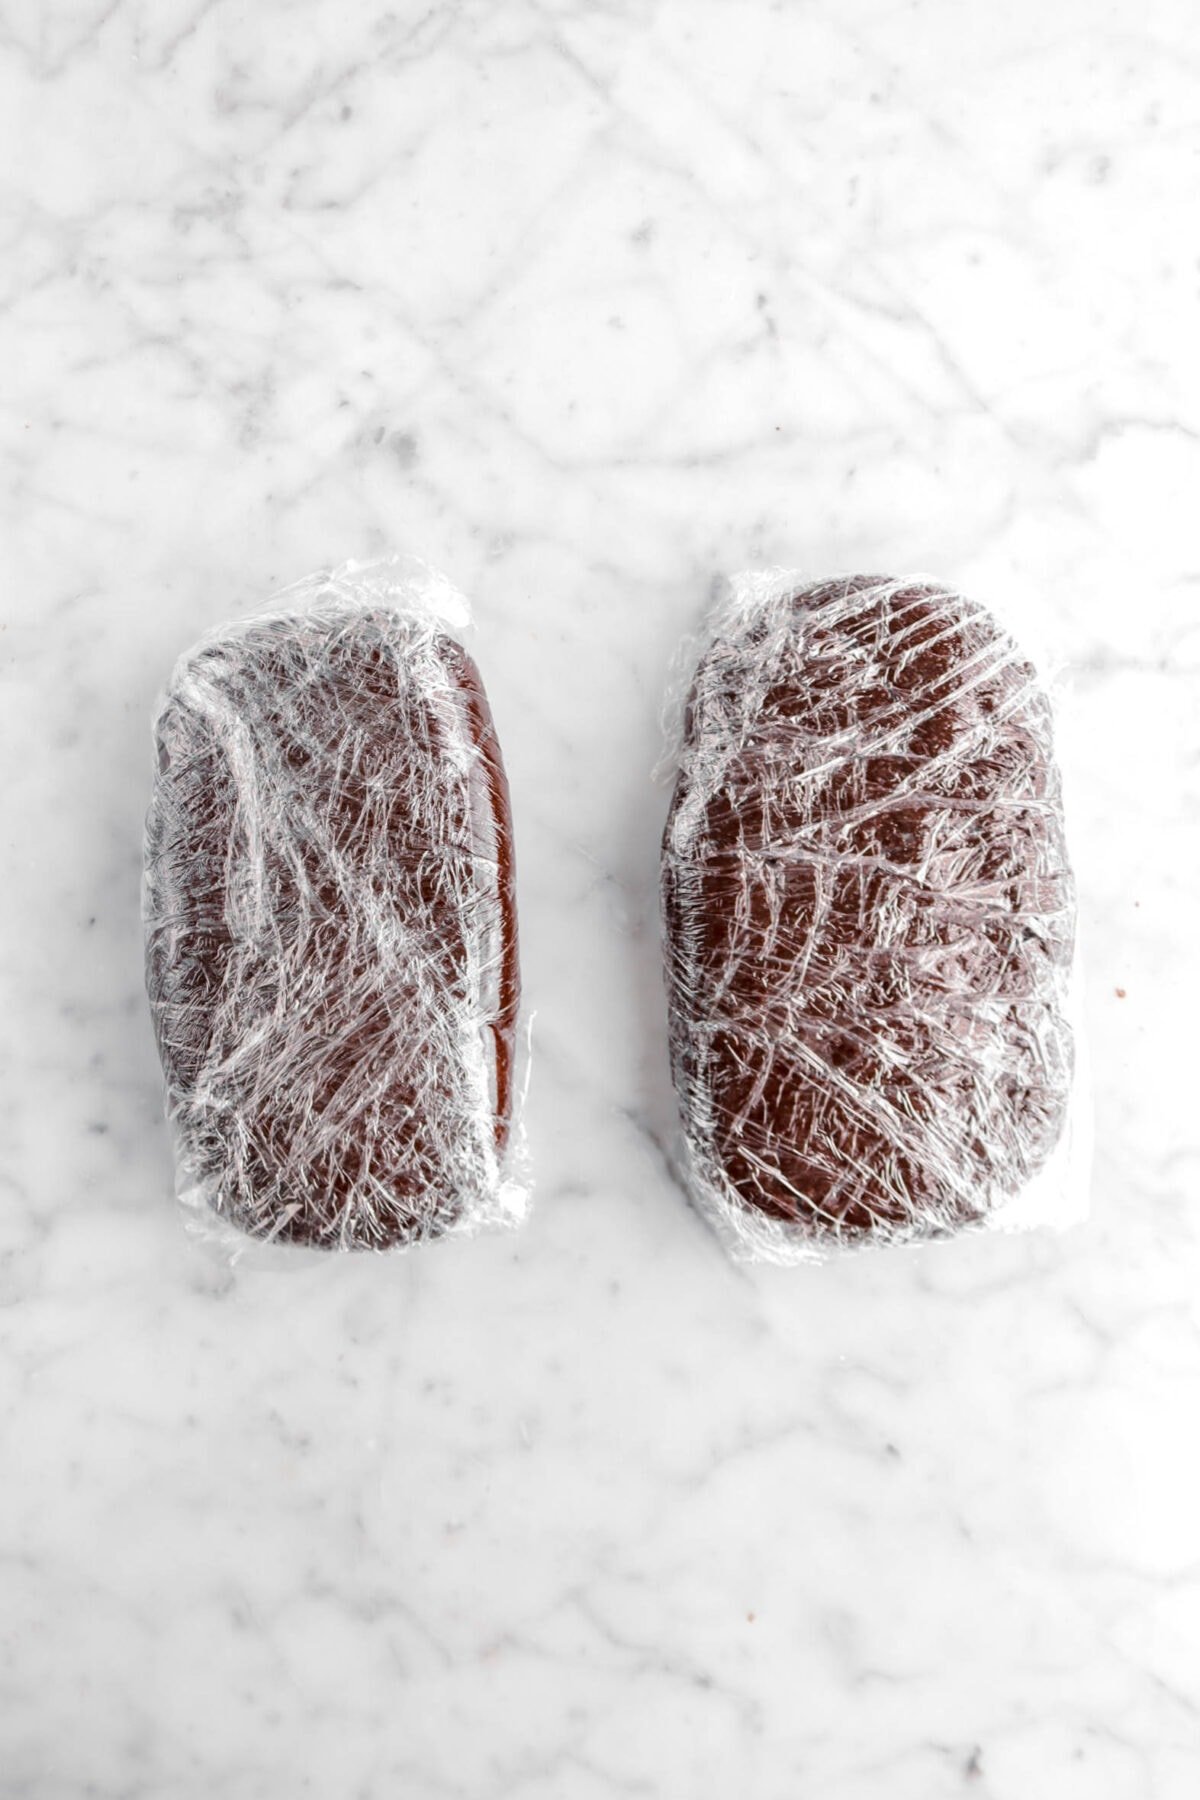 dough divided into two loaves wrapped in plastic wrap on marble surface